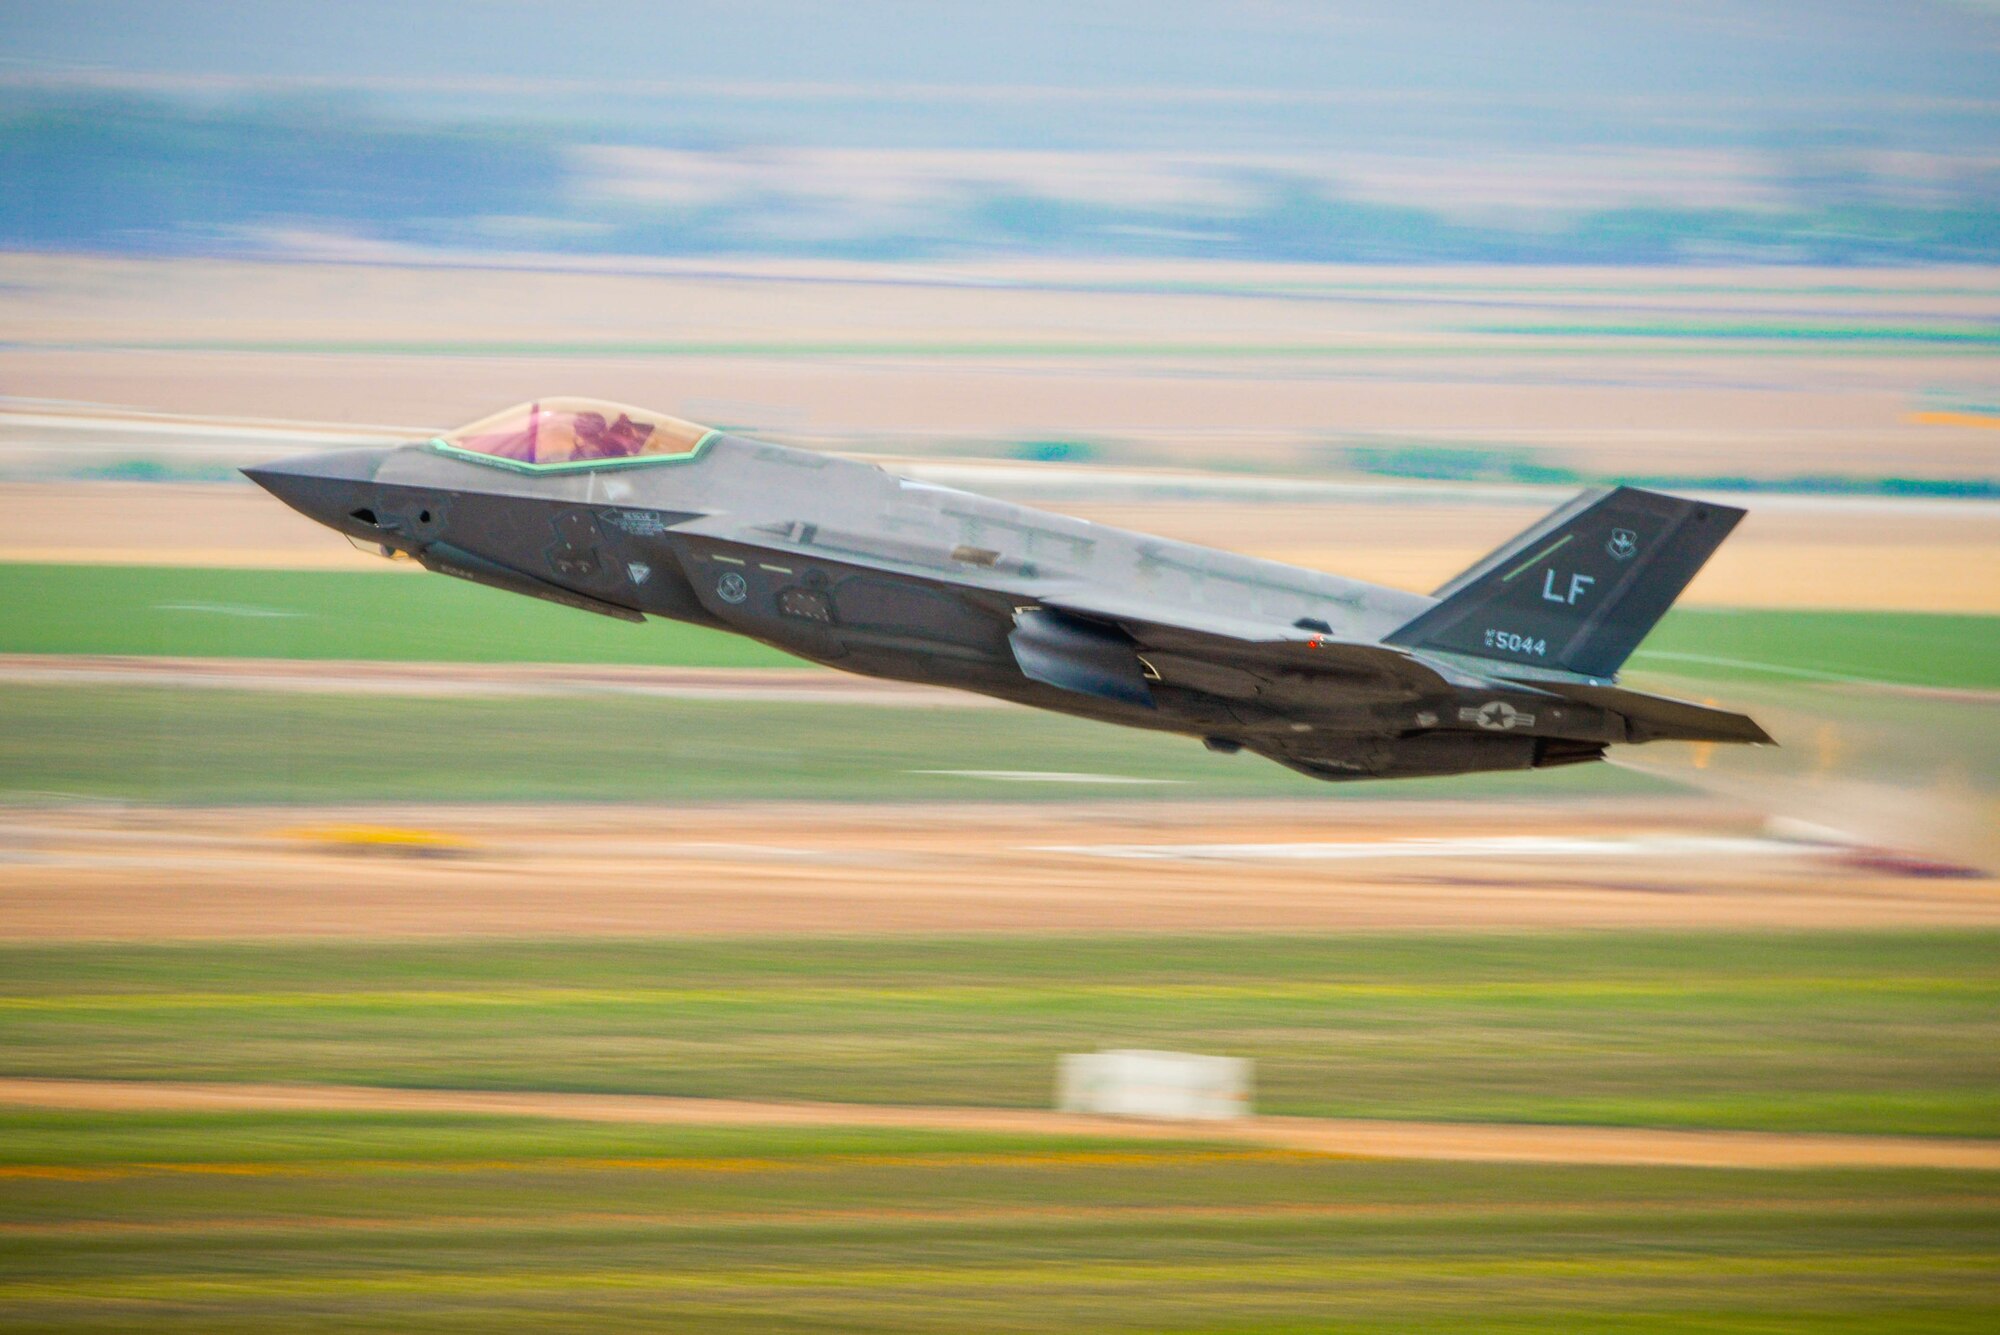 A 56th Fighter Wing F-35A Lightning II pilot takes off from Luke Air Force Base, Ariz., July 17, 2017. F-35 basic course students took part in a two and a half week, four flight phase replicating a wartime environment designed to test their training and skills. Today’s flight featured six F-35’s facing off against eight F-16 Fighting Falcons in defensive counter air attack operation measures. The students will be the first ever to graduate from a course designed specifically to utilize the mission set of the F-35. (U.S. Air Force photo/Airman 1st Class Caleb Worpel)